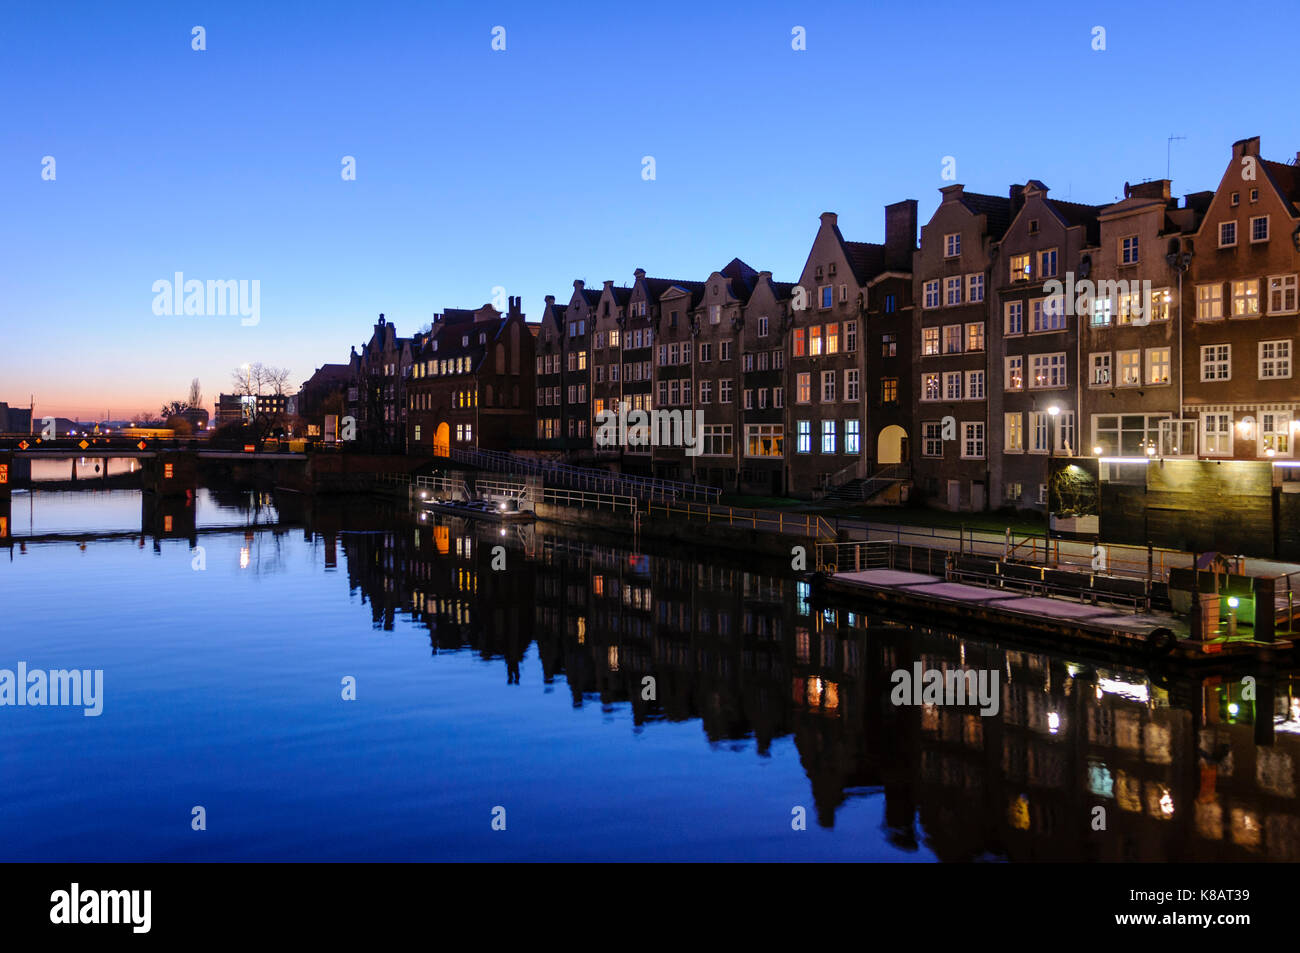 Buildings along the side of the Motława River, Gdansk, Poland at night Stock Photo